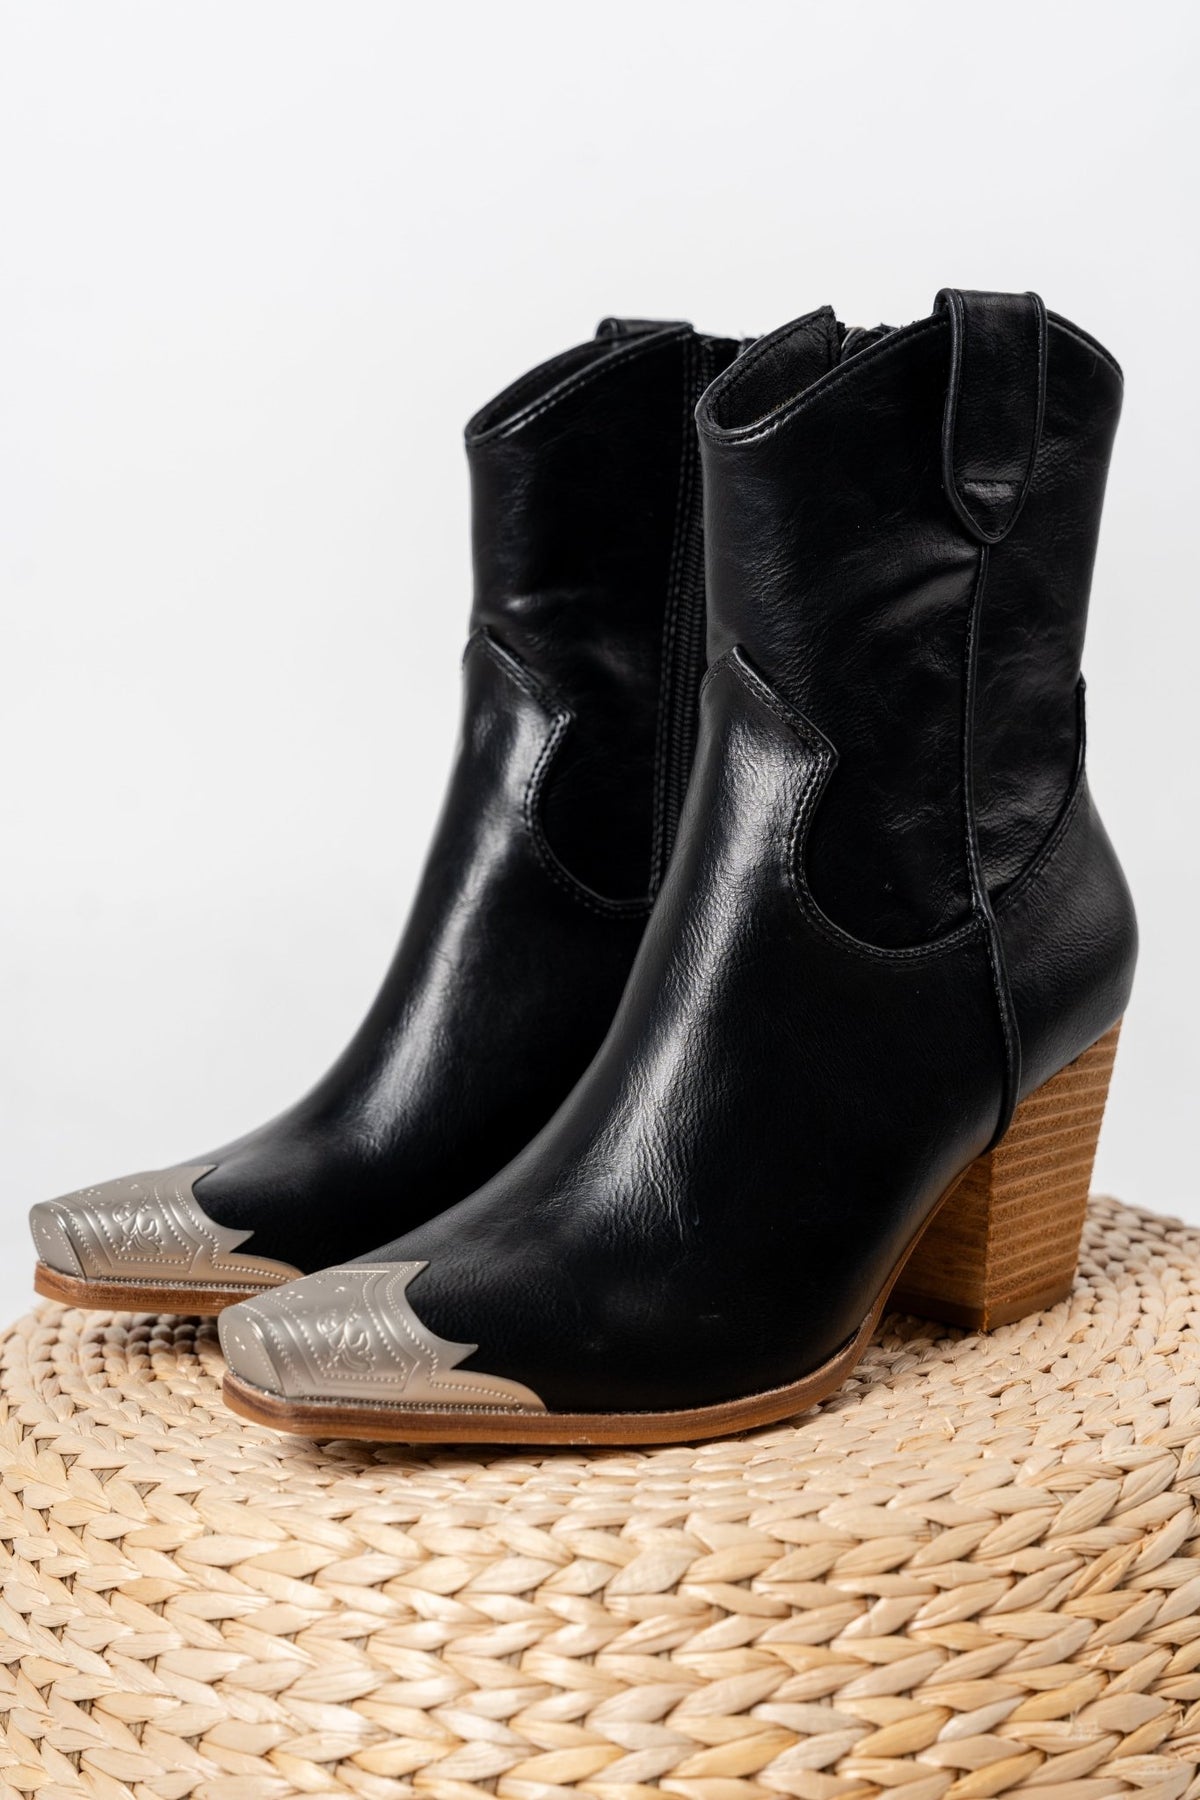 Dakota cowboy boot black - Cute boots - Trendy Shoes at Lush Fashion Lounge Boutique in Oklahoma City